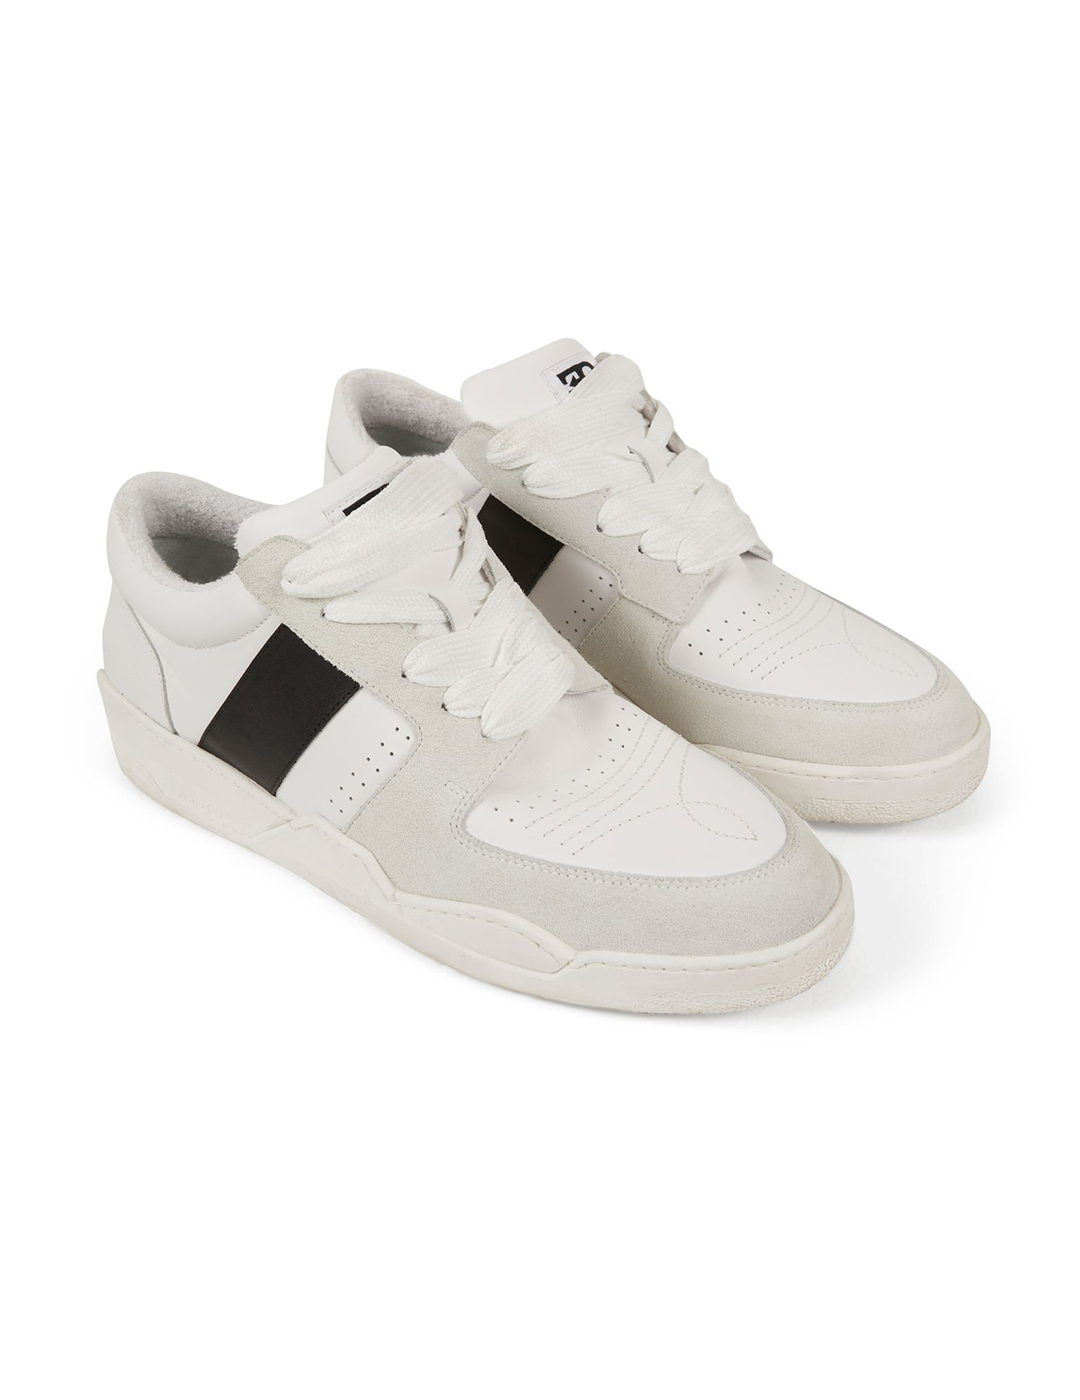 THE FB SNEAKERS IN WHITE, GREY AND BLACK LEATHER